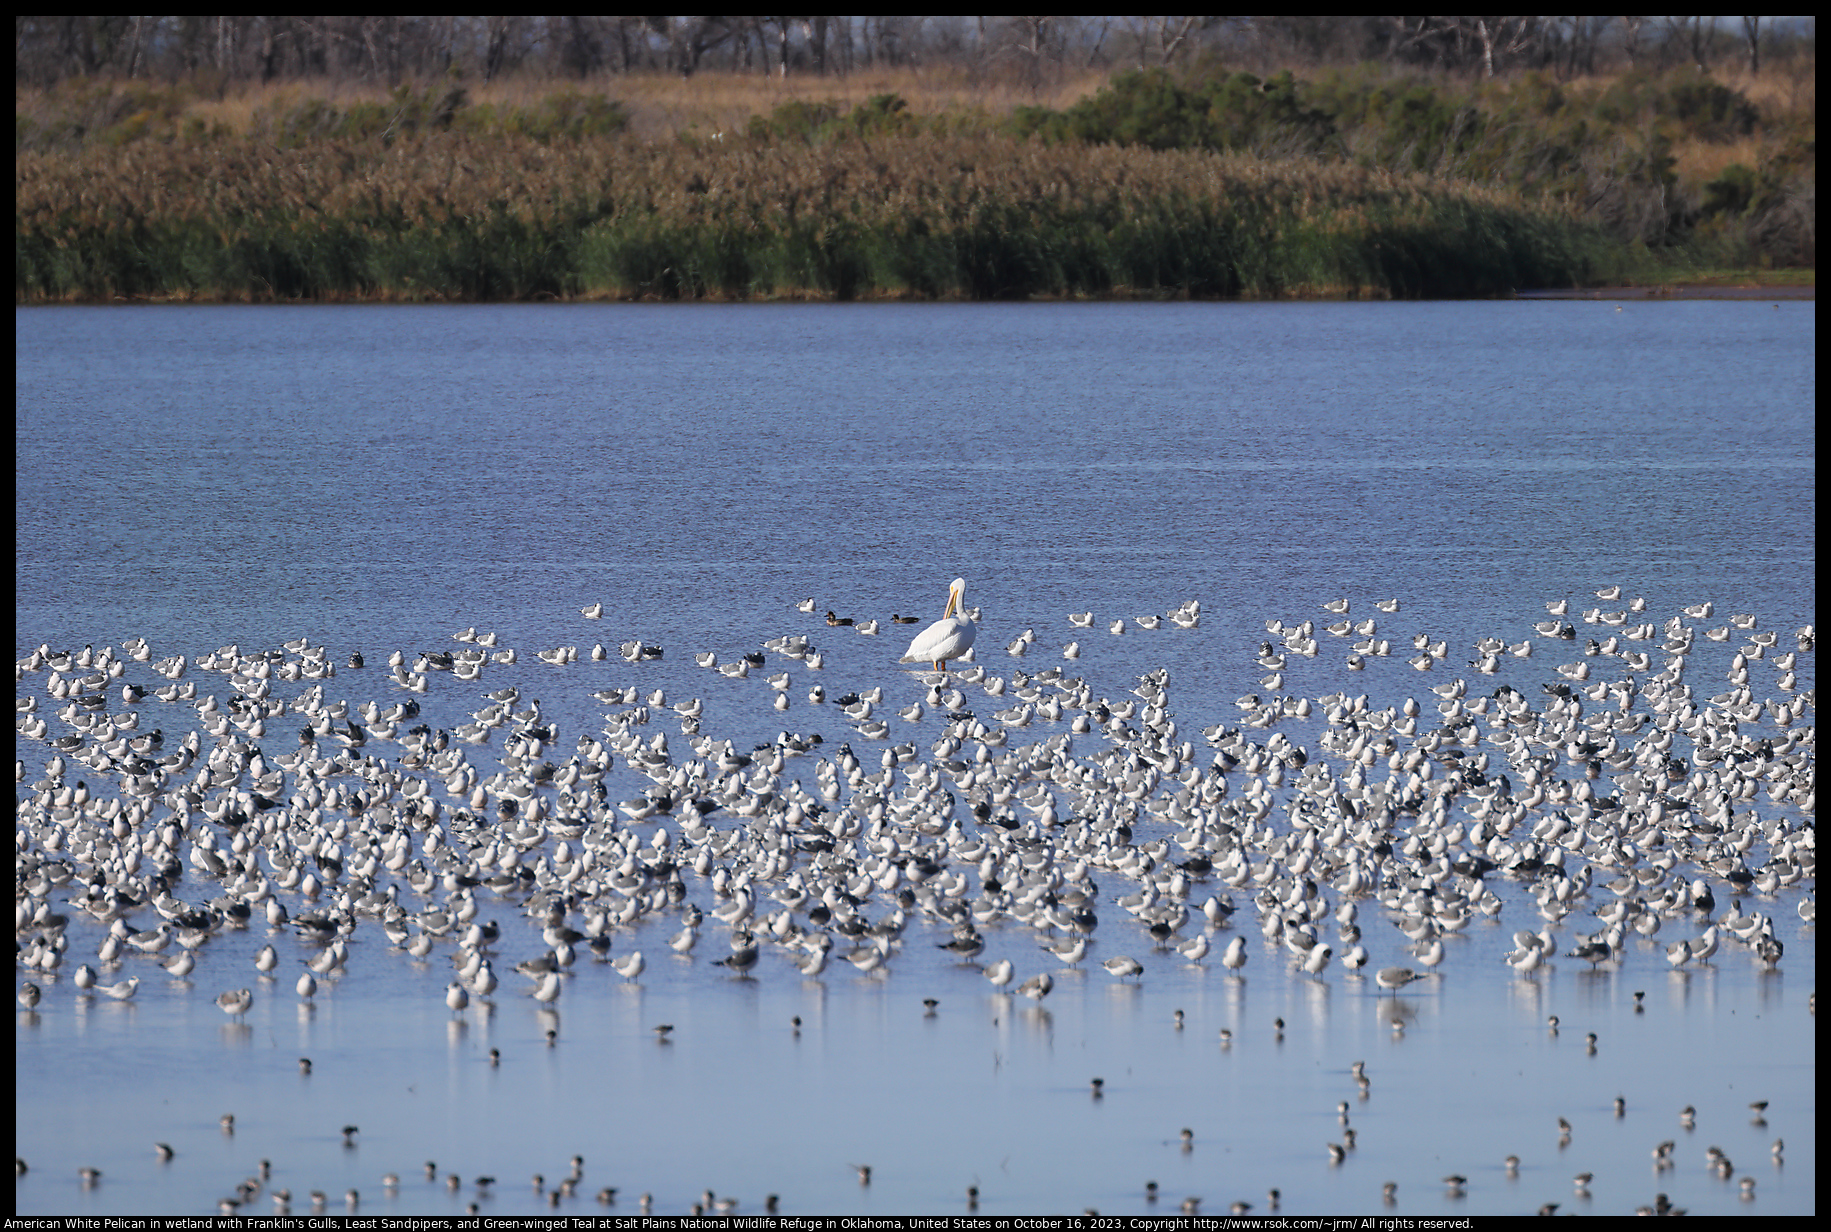 American White Pelican in wetland with Franklin's Gulls, Least Sandpipers, and Green-winged Teal at Salt Plains National Wildlife Refuge in Oklahoma, United States on October 16, 2023